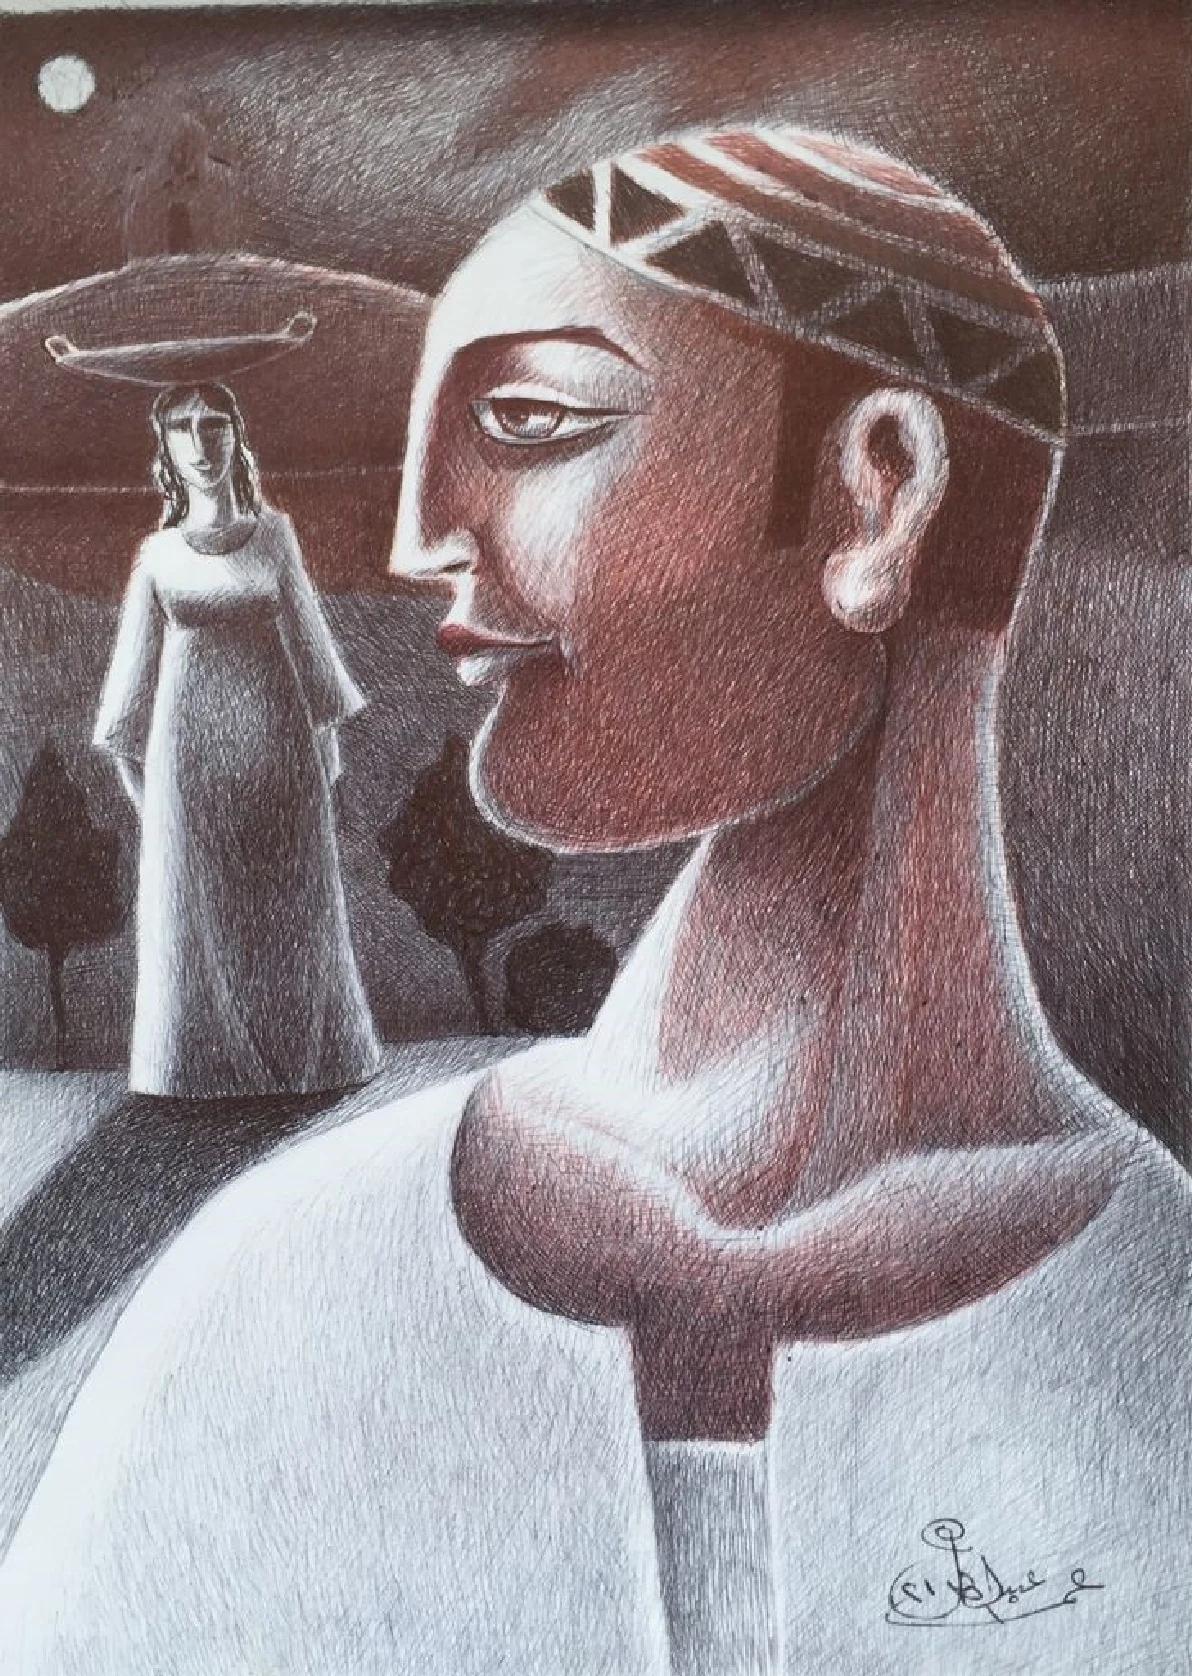 "Profile of Omda" (FRAMED) Drawing 14" x 10" inch by Omar Abdel Zaher

Abdel Zaher is a graduate of the Academy of Fine Arts in Helwan and has been painting for three decades and has notably featured in a variety of collective exhibitions, including